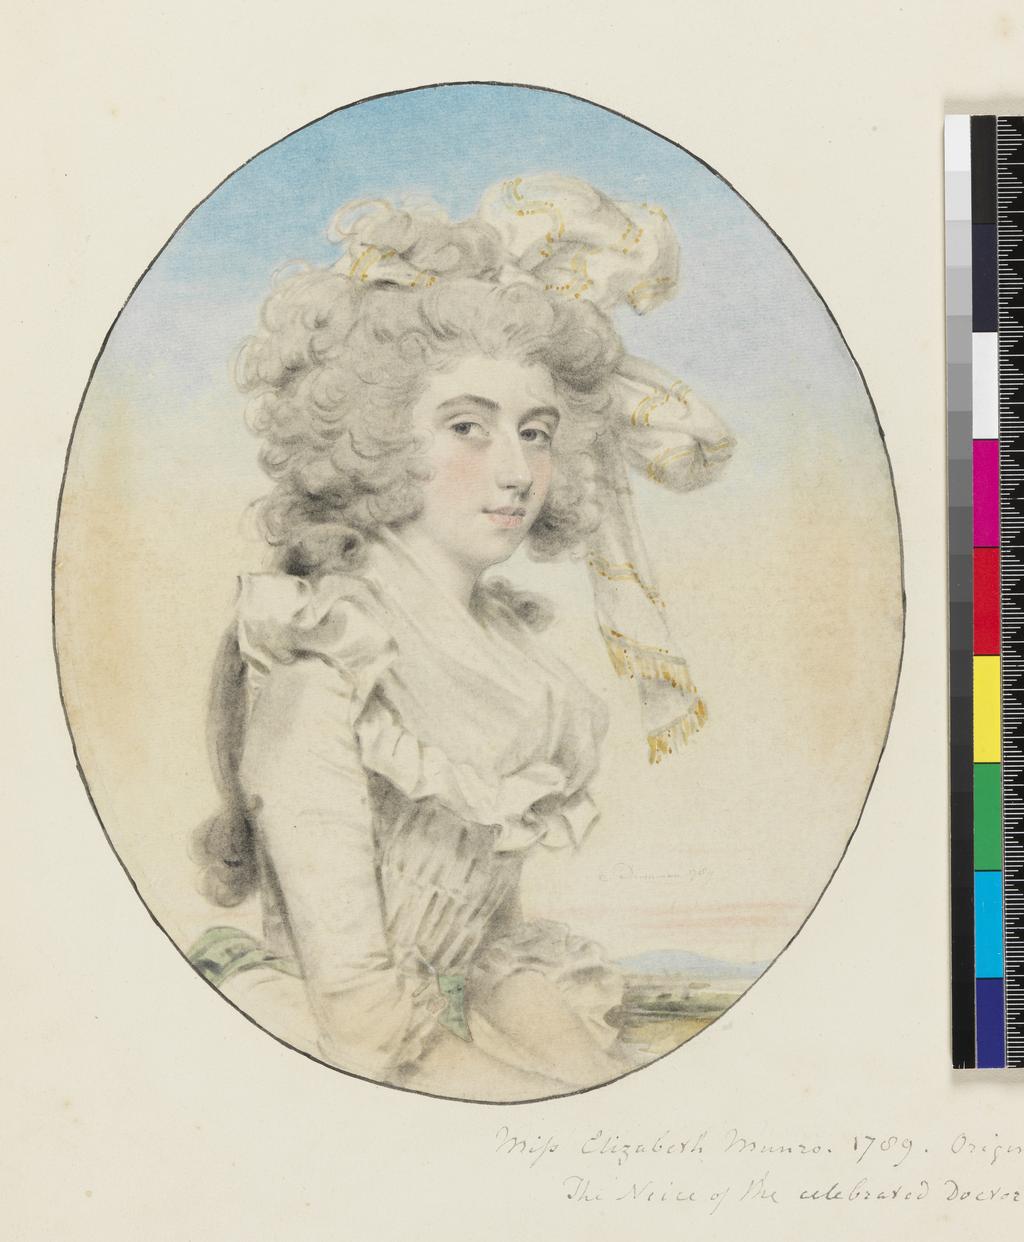 An image of Miss Elizabeth Monro. Downman, John (British, 1750-1824). Laid down on recto of album sheet, surrounded by drawn ink line. Black and red chalk, with stump, watercolour and white highlights on paper, laid down (chalk and/or watercolour applied to verso), height 213 mm, width 176 mm, 1789.